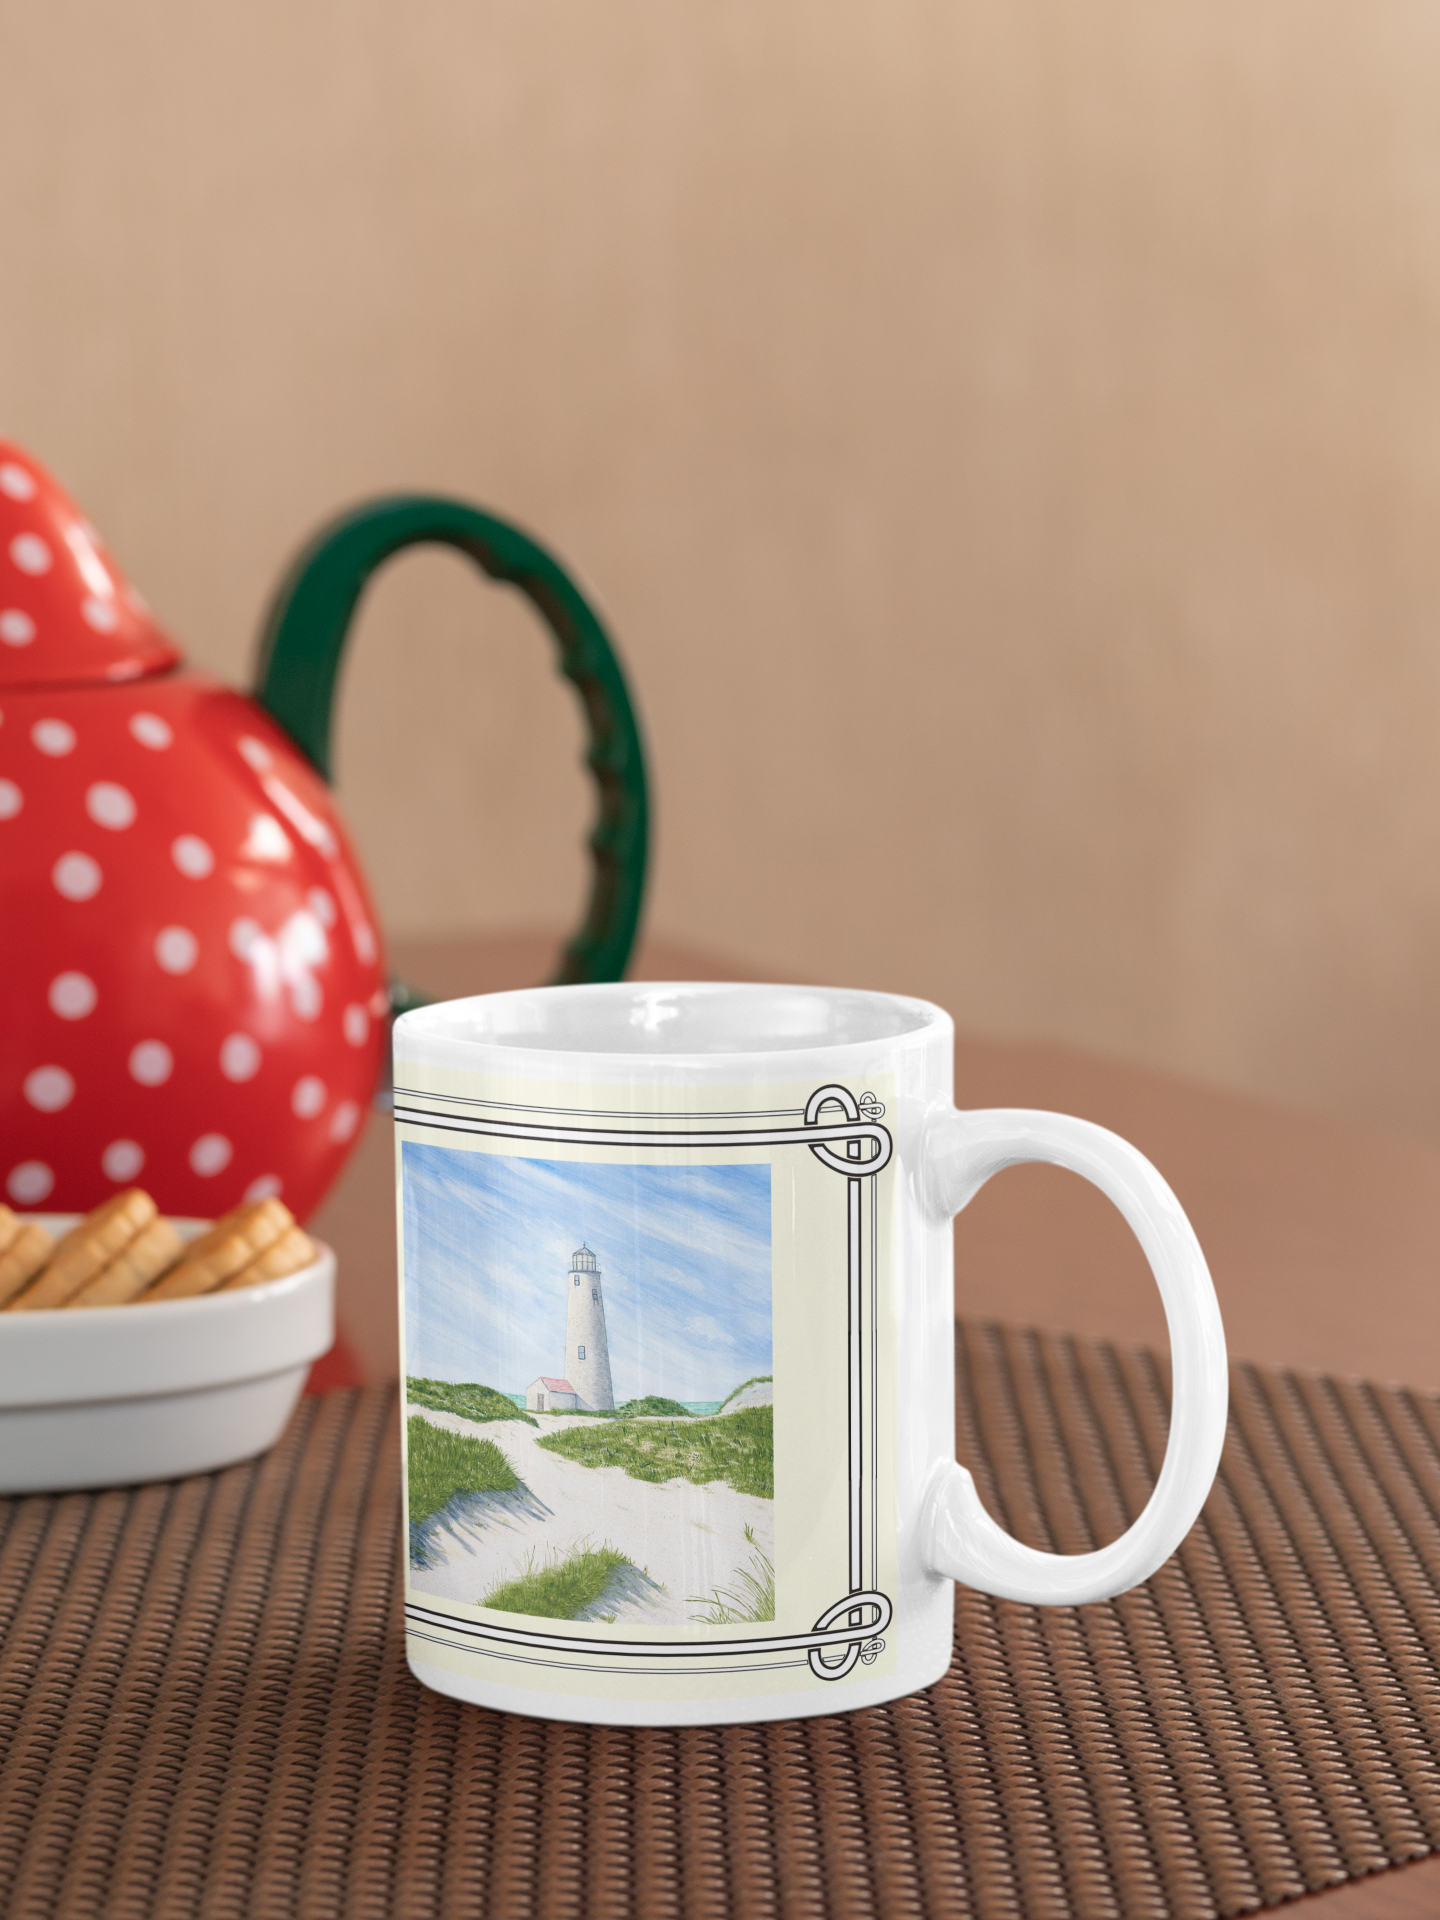 A charming Nantucket Lighthouse mug to add a special touch to your home. Great gift for lighthouse fans!